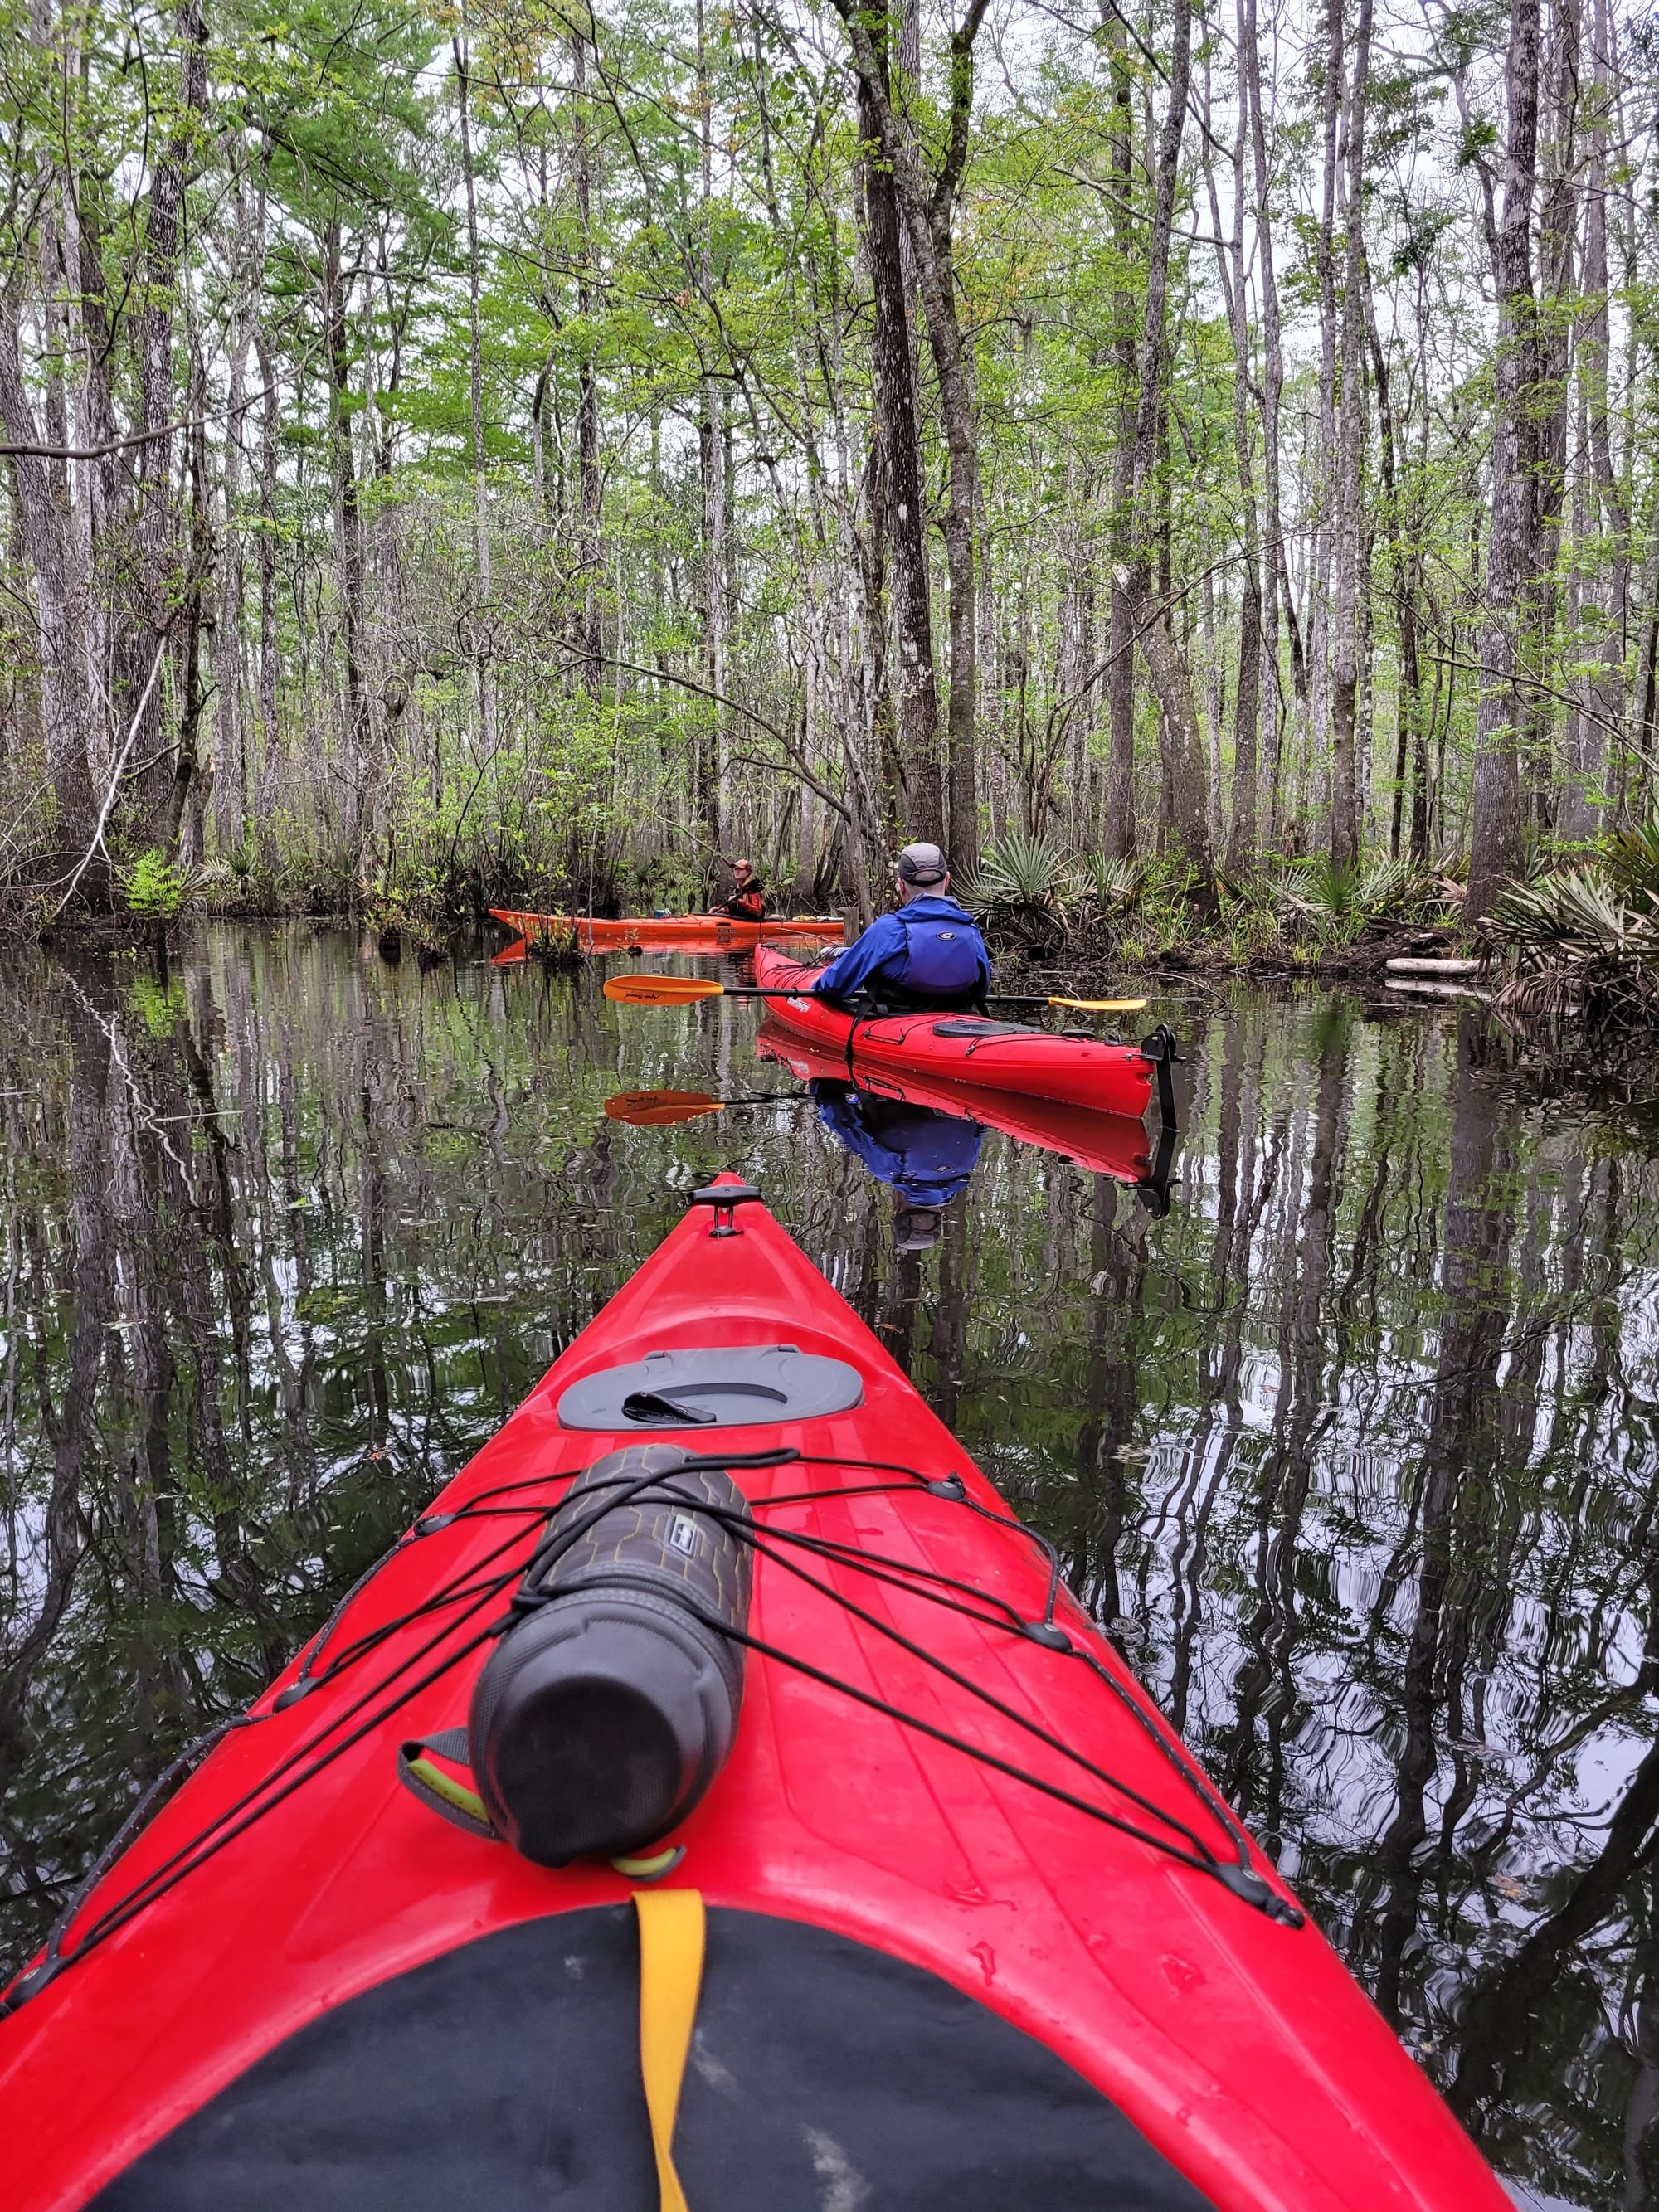 REI Trip: Kayaking from Still Landing on the Wambaw Creek in the Francis Marion National Forest